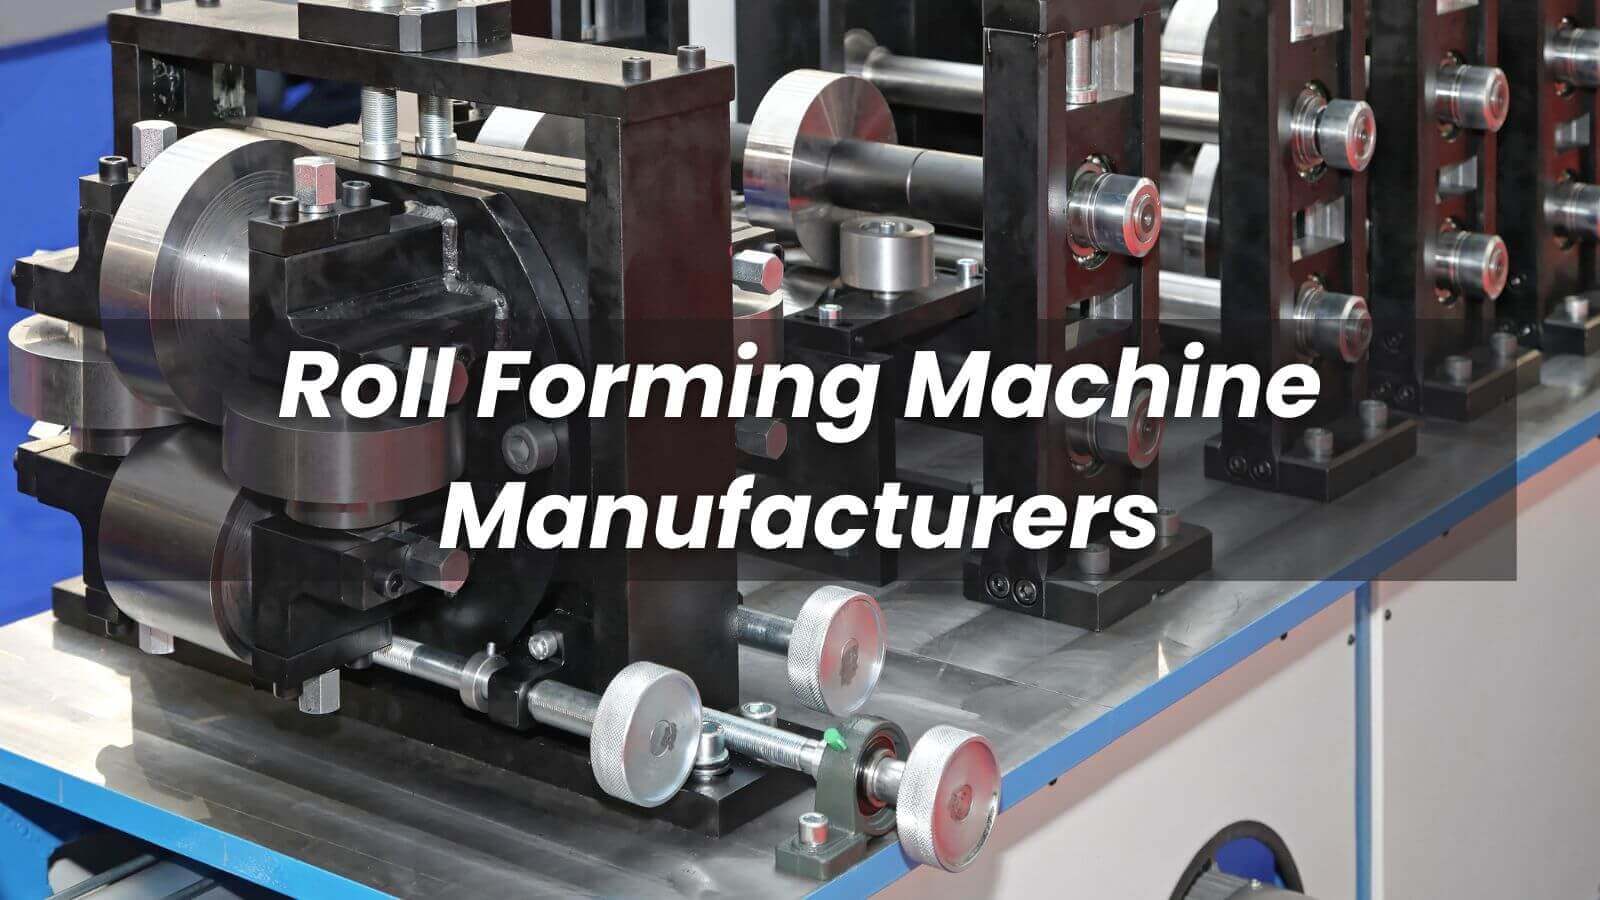 Roll Forming Machine Manufacturers in Hyderabad